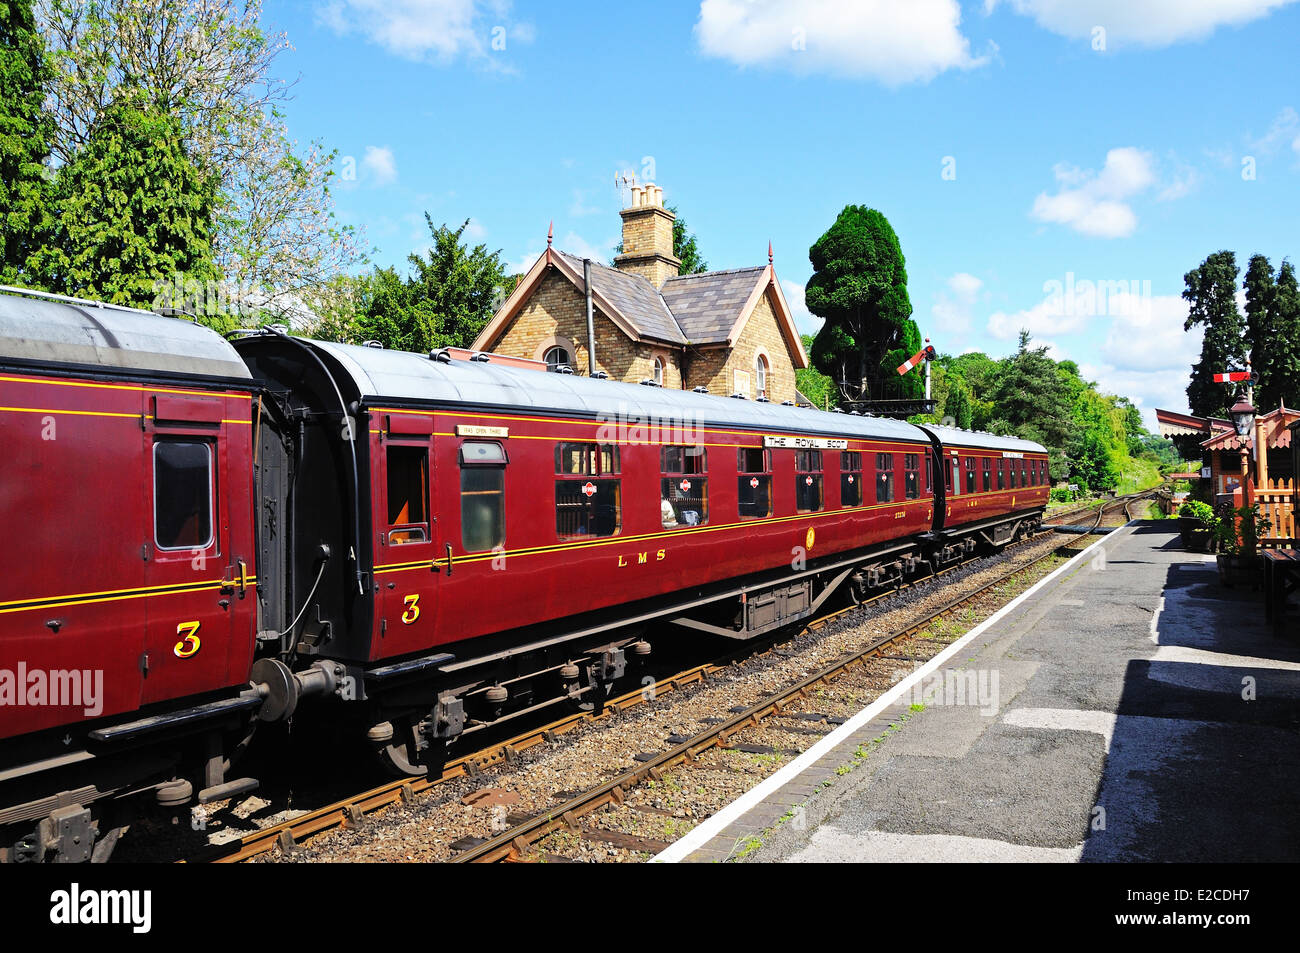 LMS passenger carriages/coaches in Maroon at the Great Western railway station, Hampton Loade, Shropshire, England, UK. Stock Photo